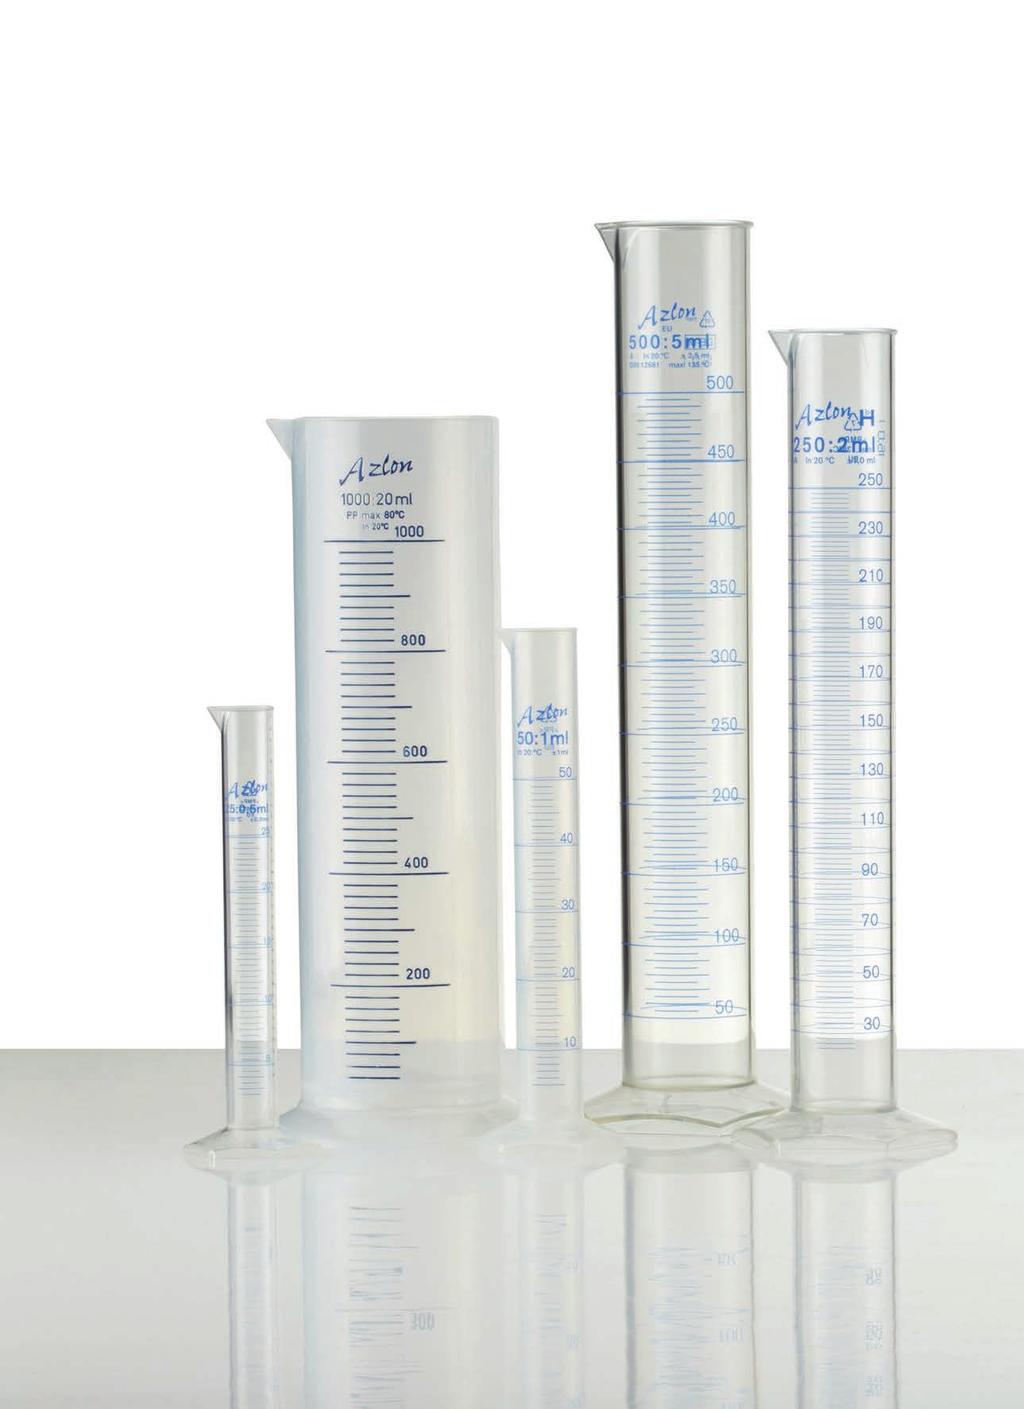 volumetrics The Azlon volumetrics range has all the essentials needed for measuring in the lab, from conical and volumetric flasks to measuring cylinders and burettes and all